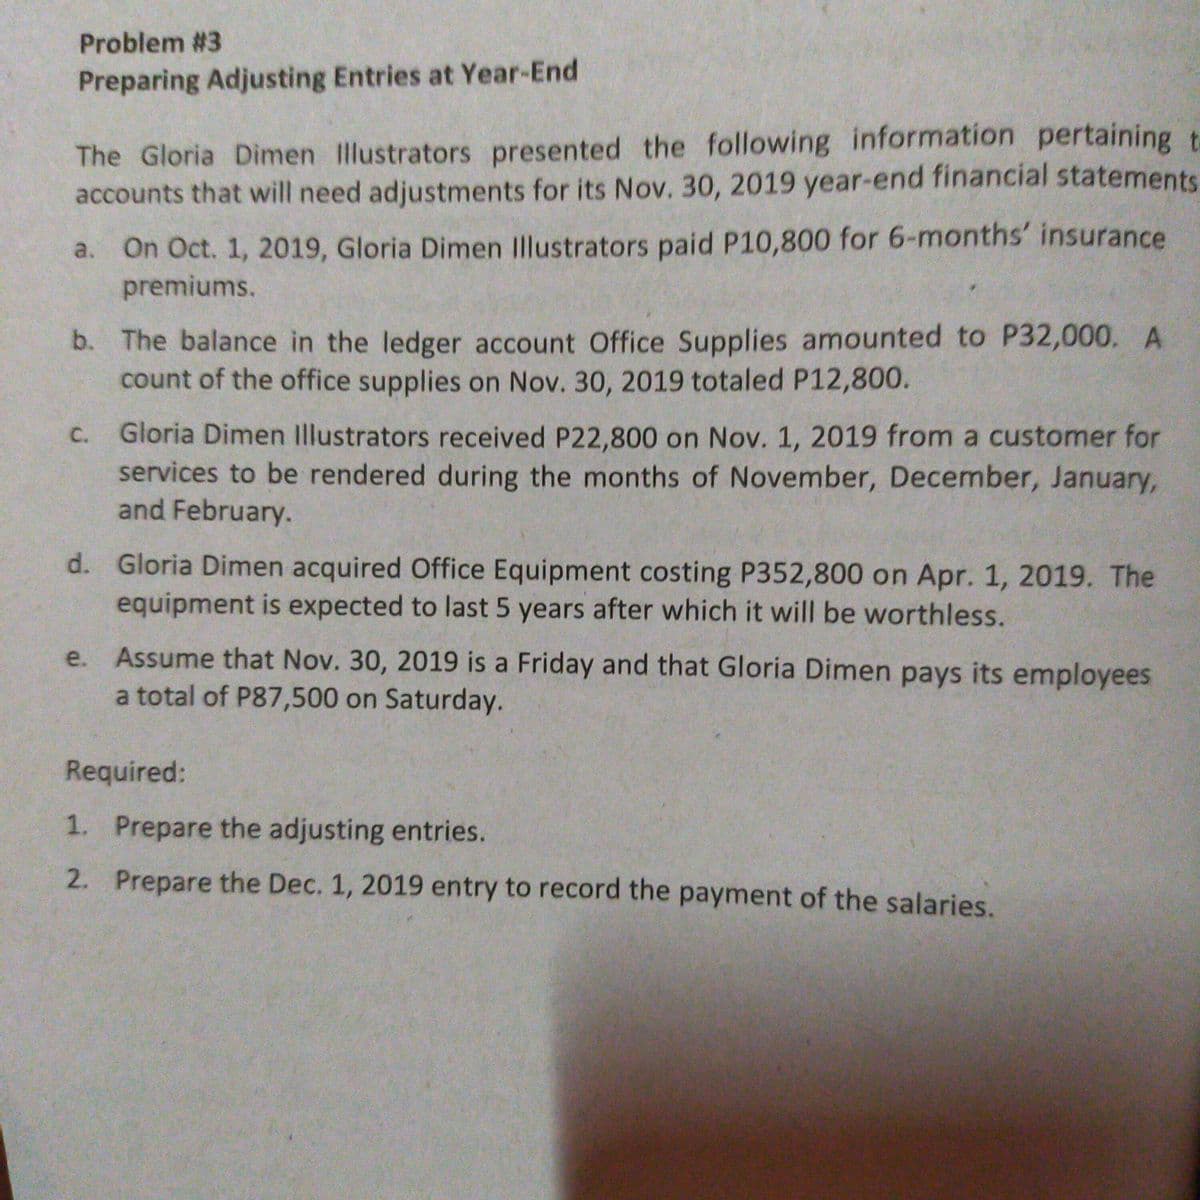 Problem #3
Preparing Adjusting Entries at Year-End
The Gloria Dimen Illustrators presented the following information pertaining t
accounts that will need adjustments for its Nov. 30, 2019 year-end financial statements
On Oct. 1, 2019, Gloria Dimen Illustrators paid P10,800 for 6-months' insurance
premiums.
a.
b. The balance in the ledger account Office Supplies amounted to P32,000. A
count of the office supplies on Nov. 30, 2019 totaled P12,800.
C. Gloria Dimen Illustrators received P22,800 on Nov. 1, 2019 from a customer for
services to be rendered during the months of November, December, January,
and February.
d. Gloria Dimen acquired Office Equipment costing P352,800 on Apr. 1, 2019. The
equipment is expected to last 5 years after which it will be worthless.
e. Assume that Nov. 30, 2019 is a Friday and that Gloria Dimen pays its employees
a total of P87,500 on Saturday.
Required:
1. Prepare the adjusting entries.
2. Prepare the Dec. 1, 2019 entry to record the payment of the salaries.
